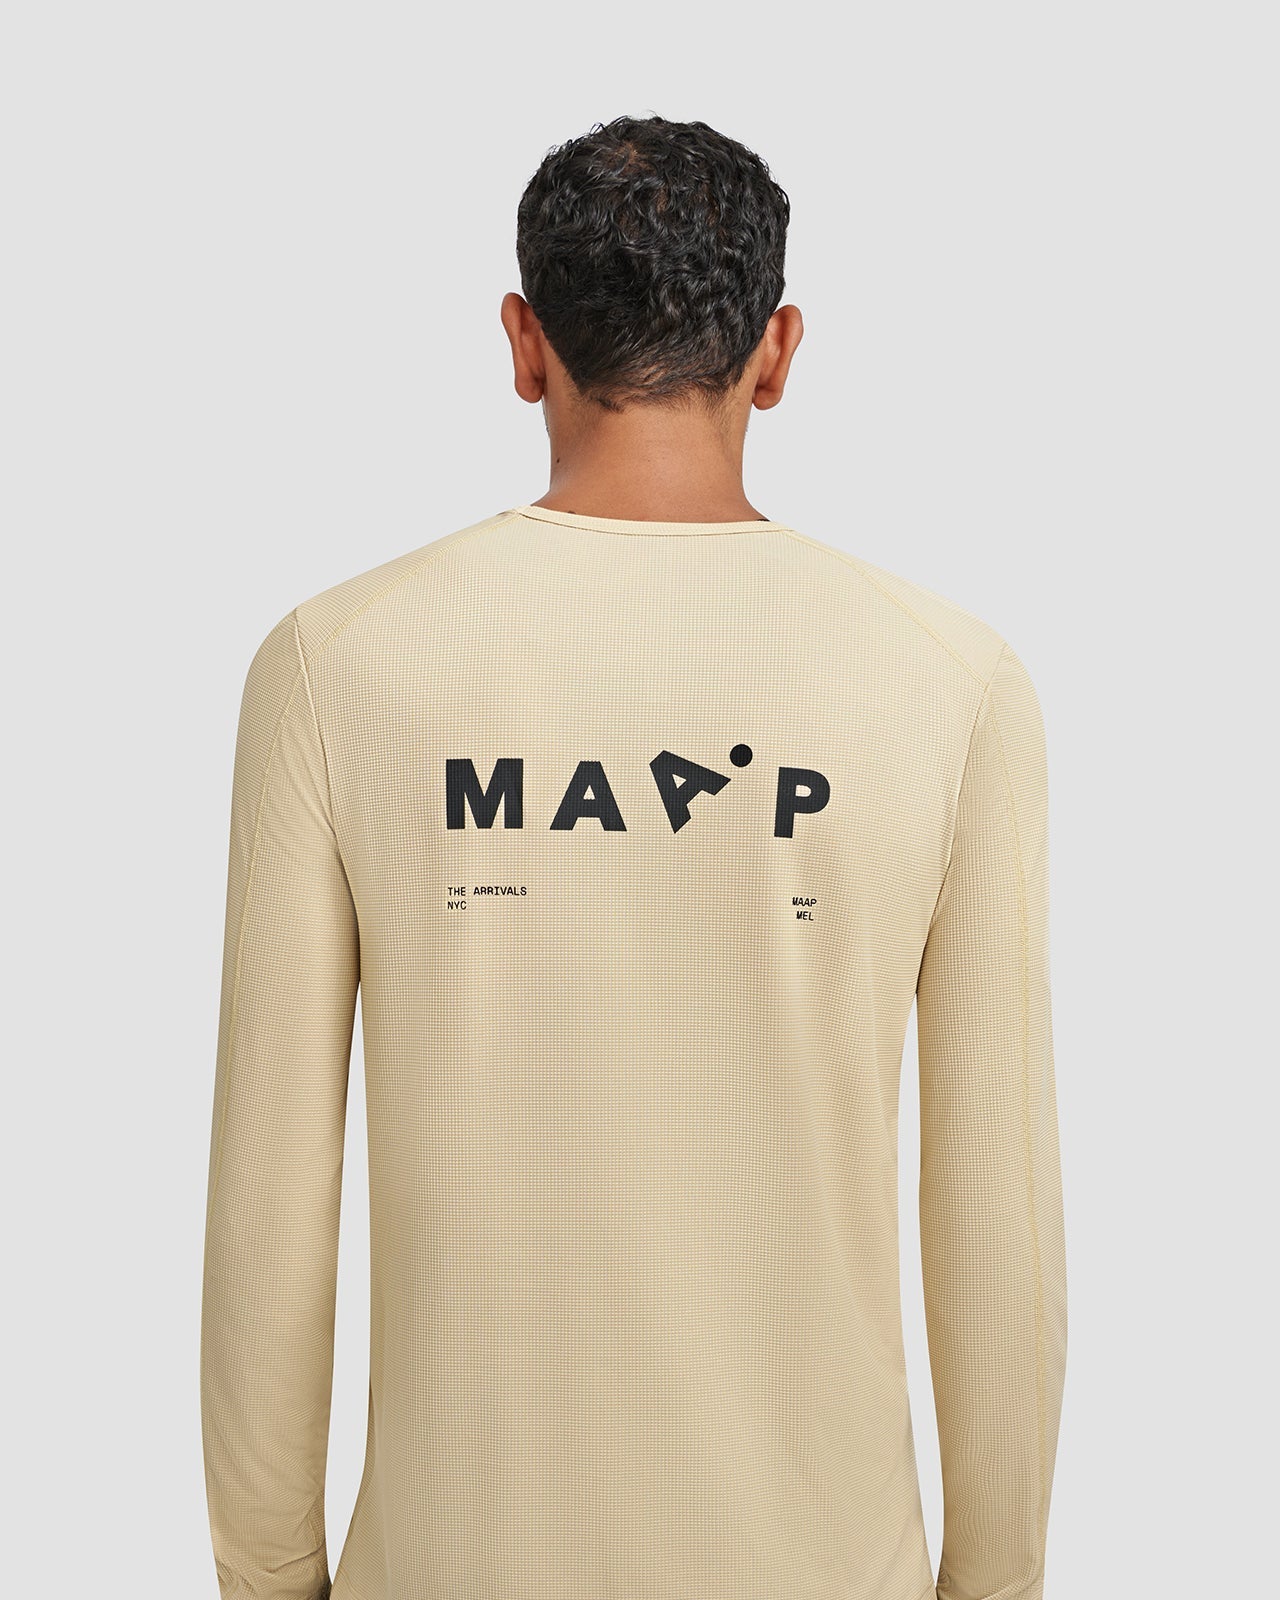 MAAP x The Arrivals LS Tee - Sand